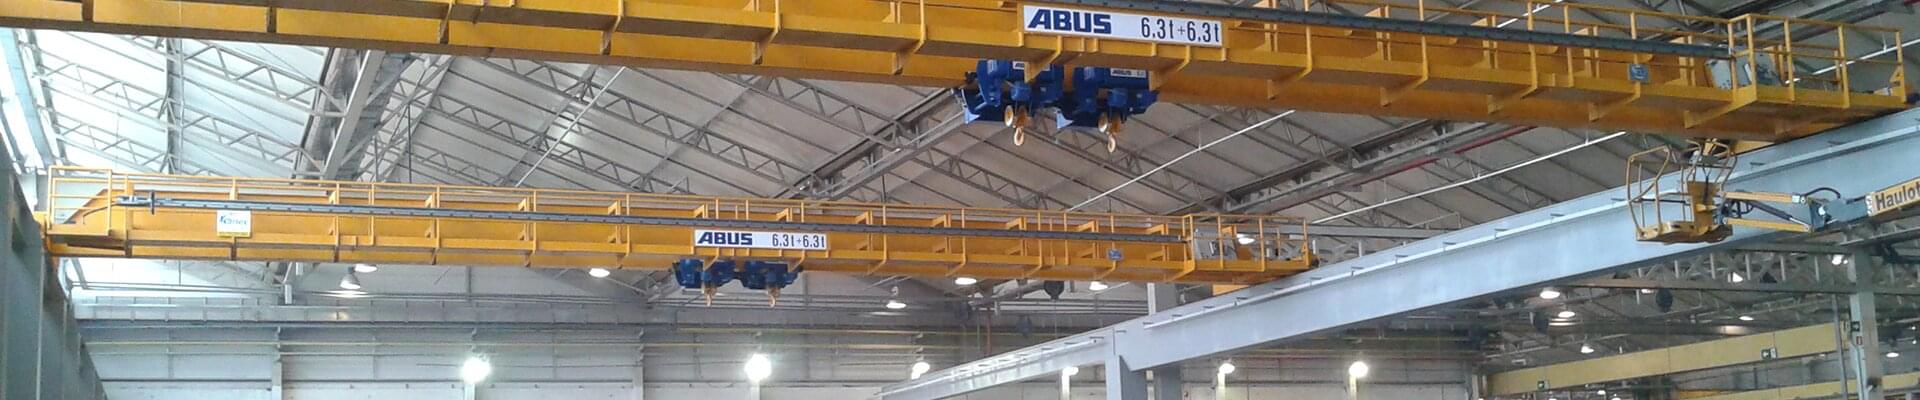 Optimisation of the process flow with ABUS cranes at Randon Implementos in Brazil